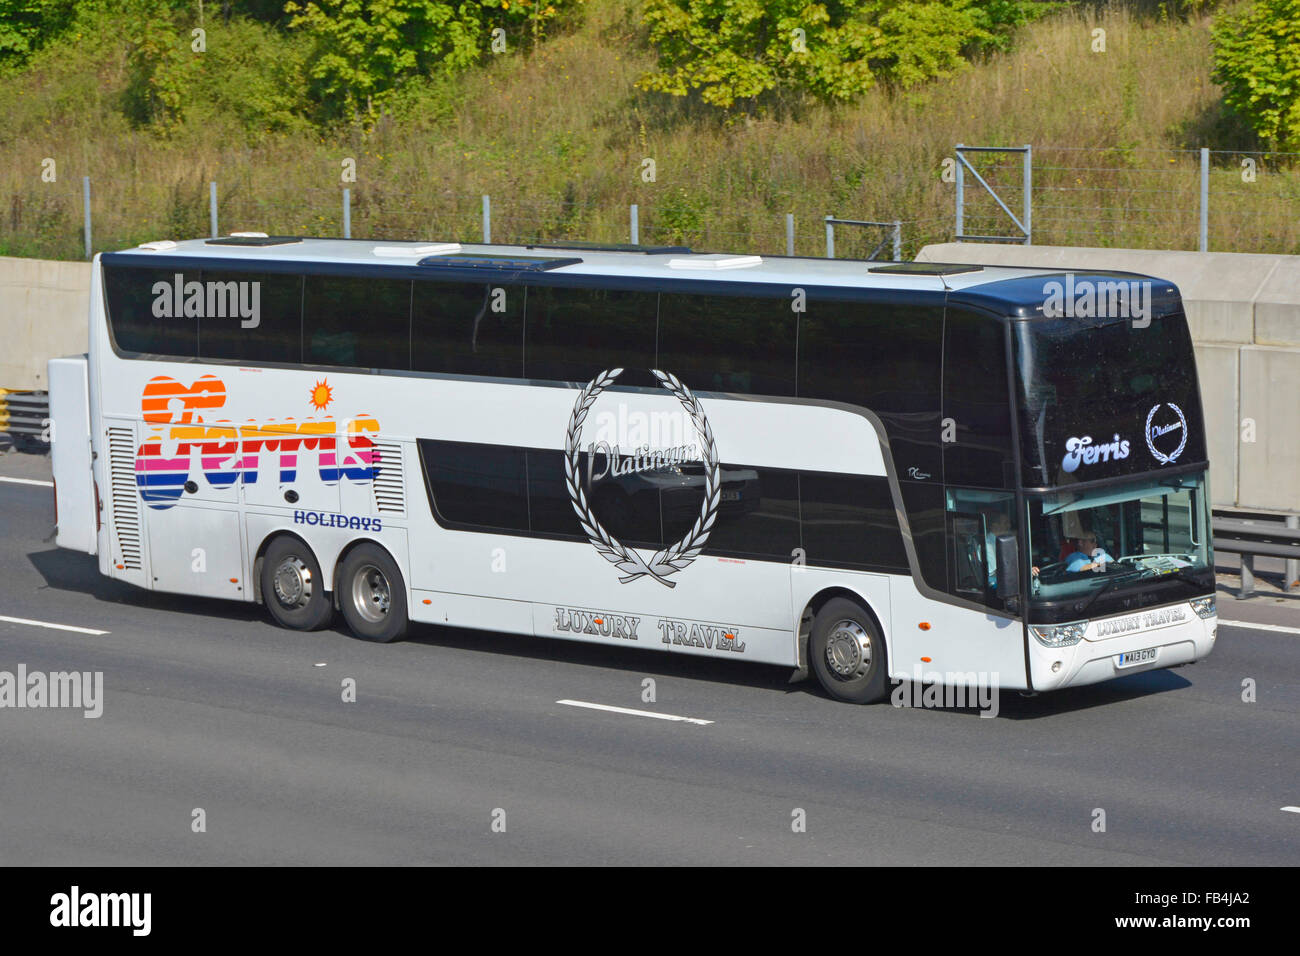 Ferris Holidays Luxury Travel business double decker coach bus transport & driver with dark tinted windows driving along UK motorway Stock Photo